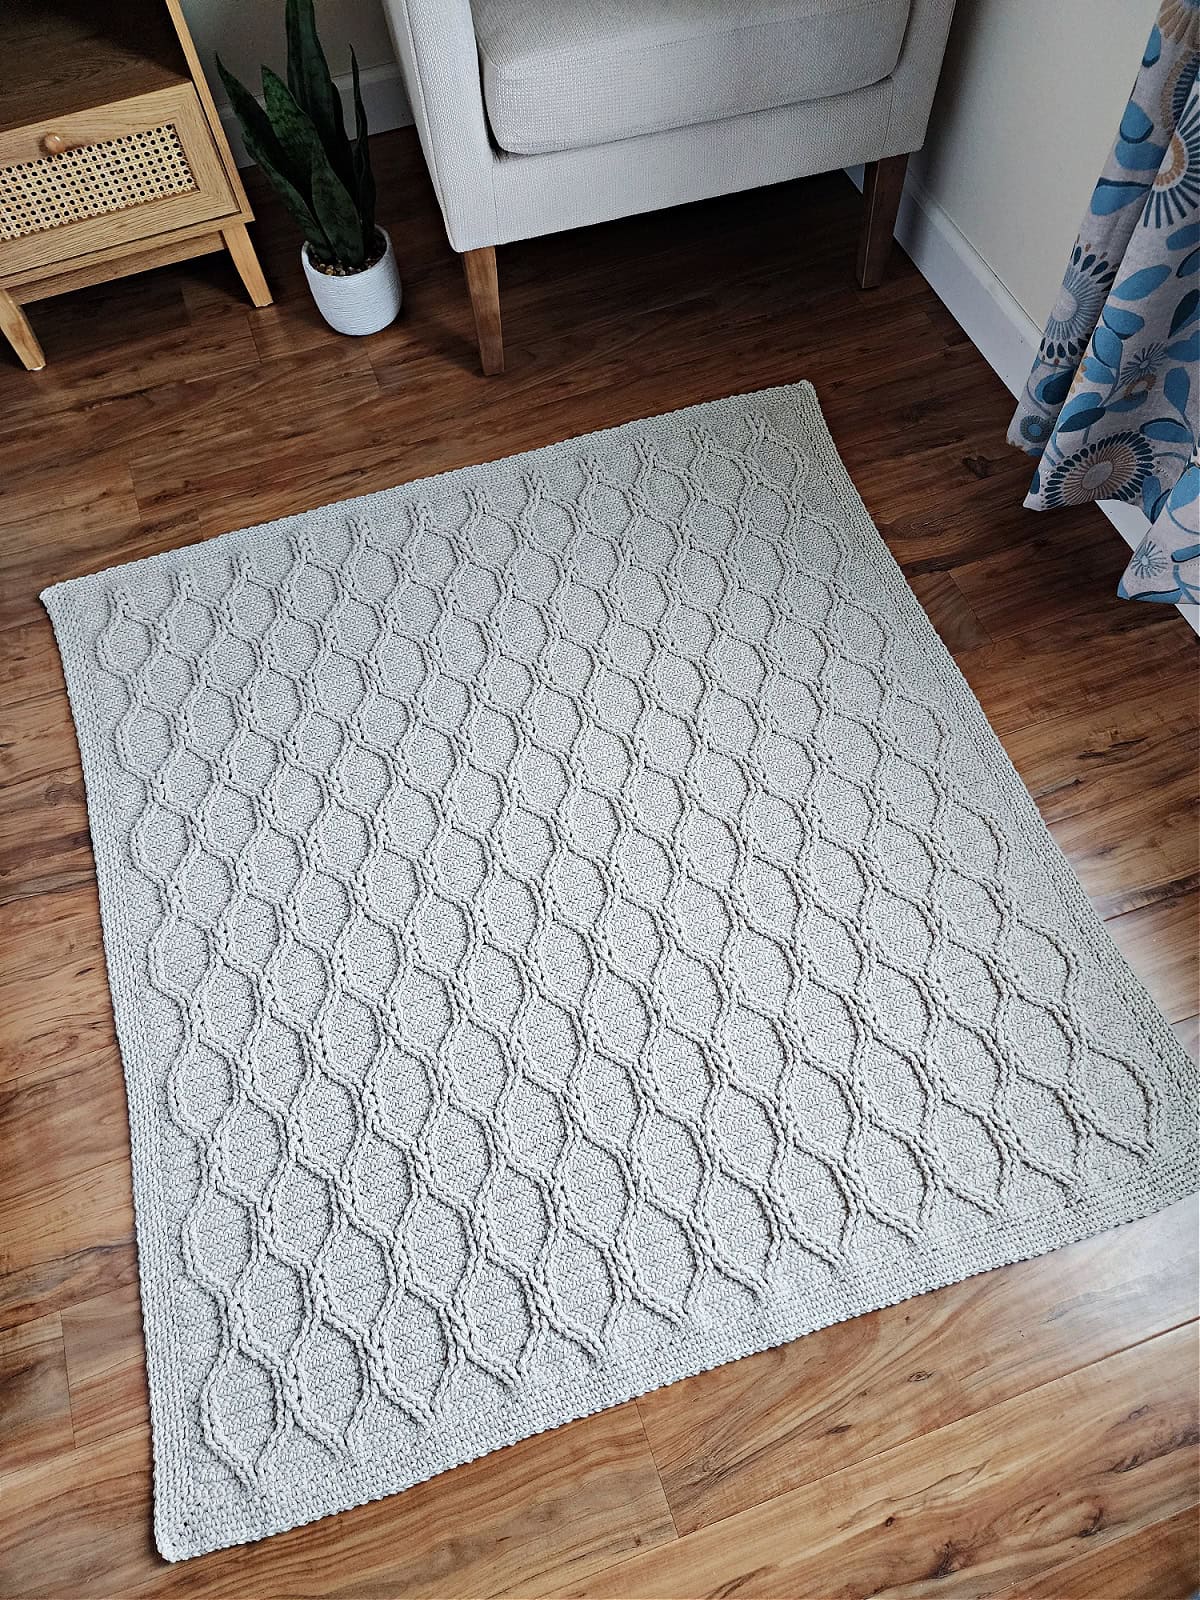 Crochet cable throw spread out on wood floor.